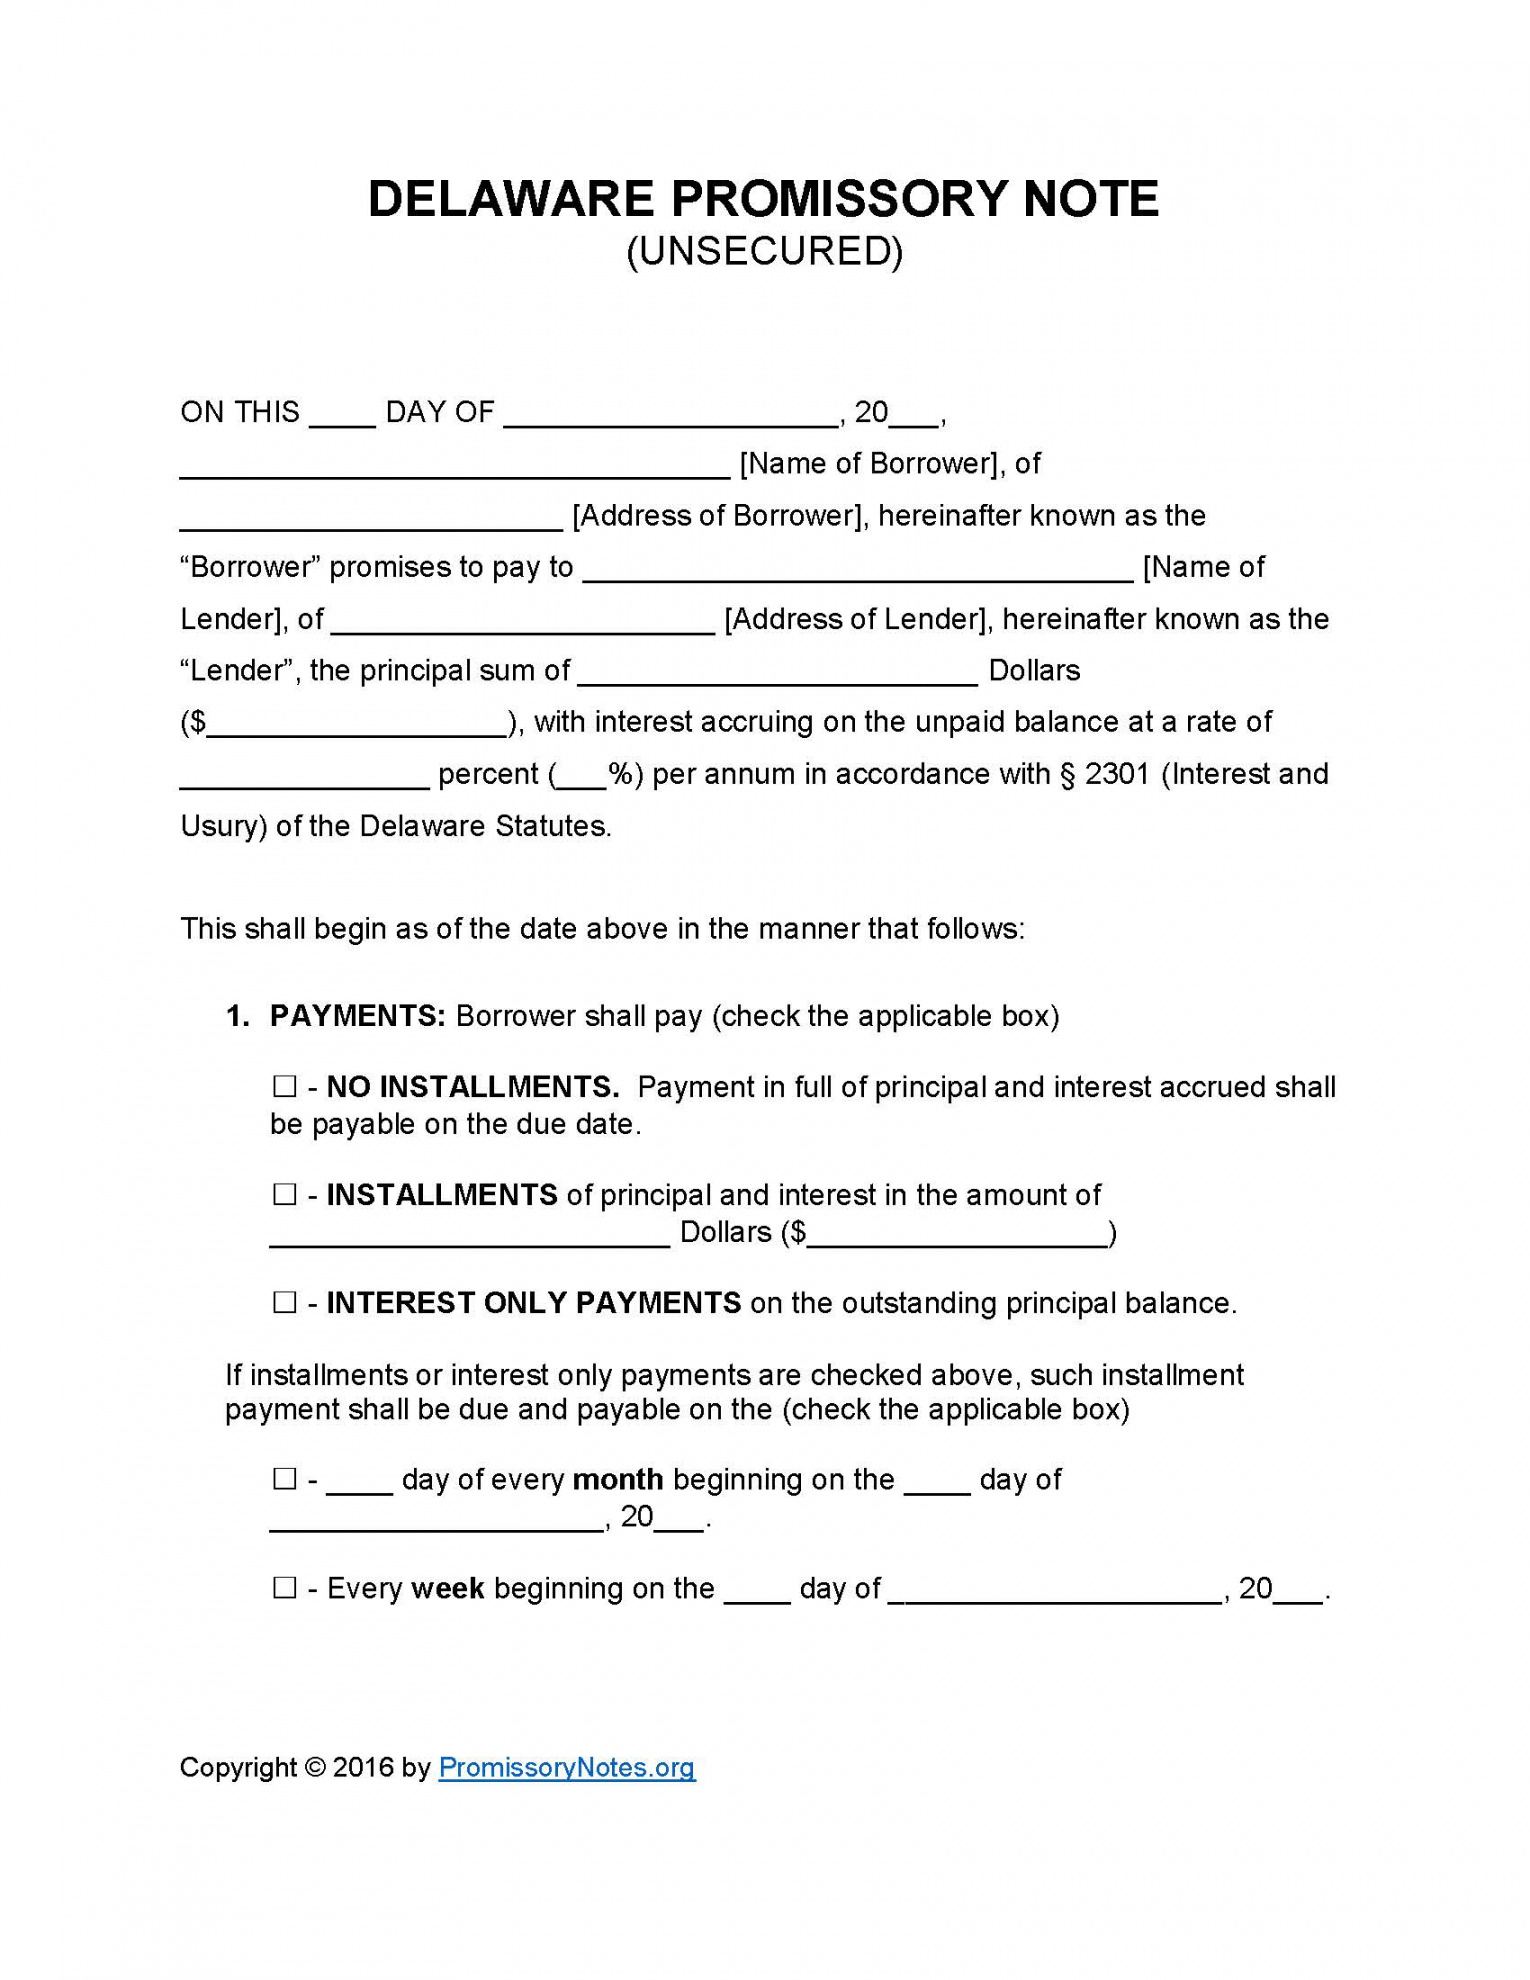 free delaware unsecured promissory note template  promissory corporate promissory note template